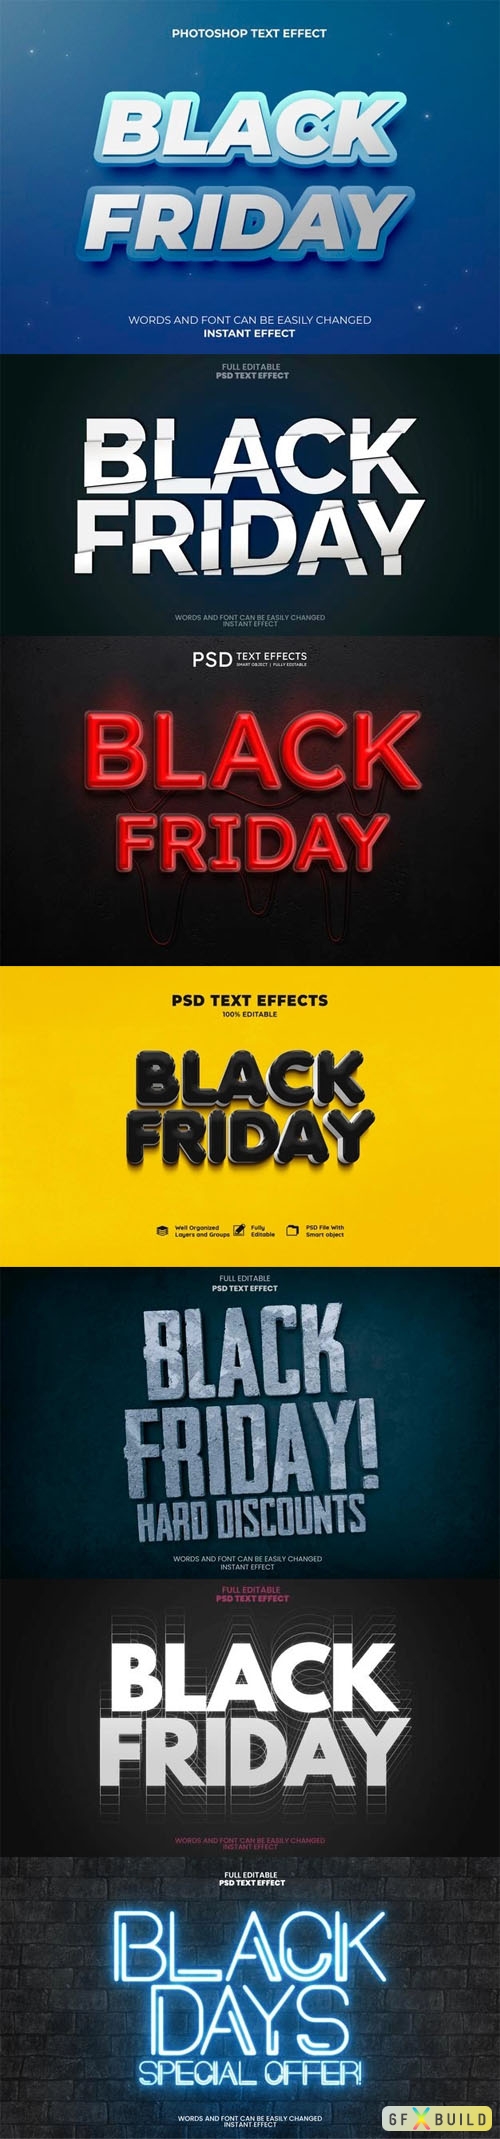 7 Black Friday Text Effects PSD Templates